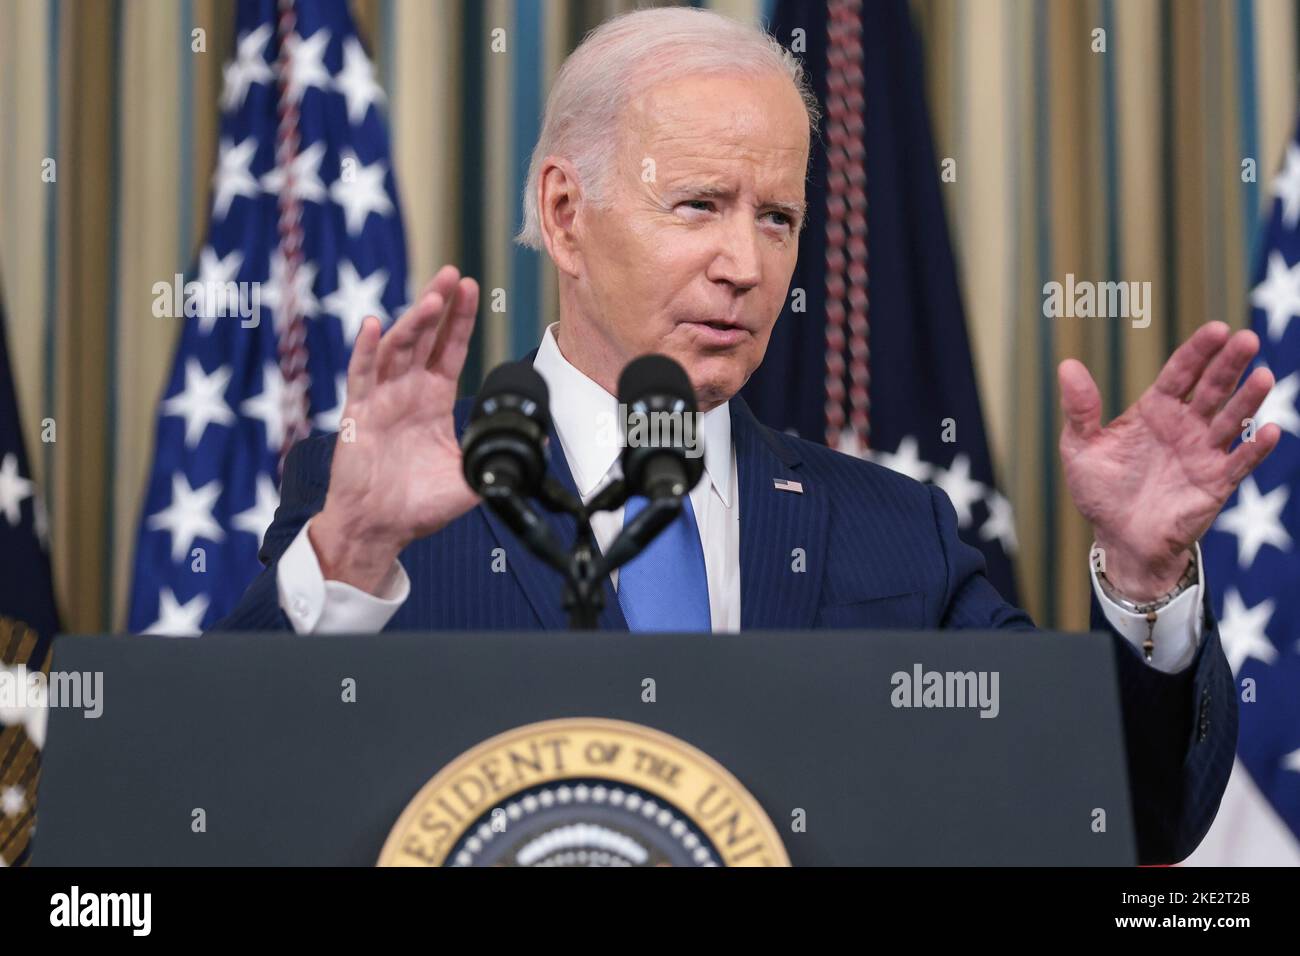 United States President Joe Biden delivers remarks and takes questions in the State Dining Room at The White House in Washington, DC, following the results of the midterm elections, on November 9, 2022. Credit: Oliver Contreras/Pool via CNP Stock Photo